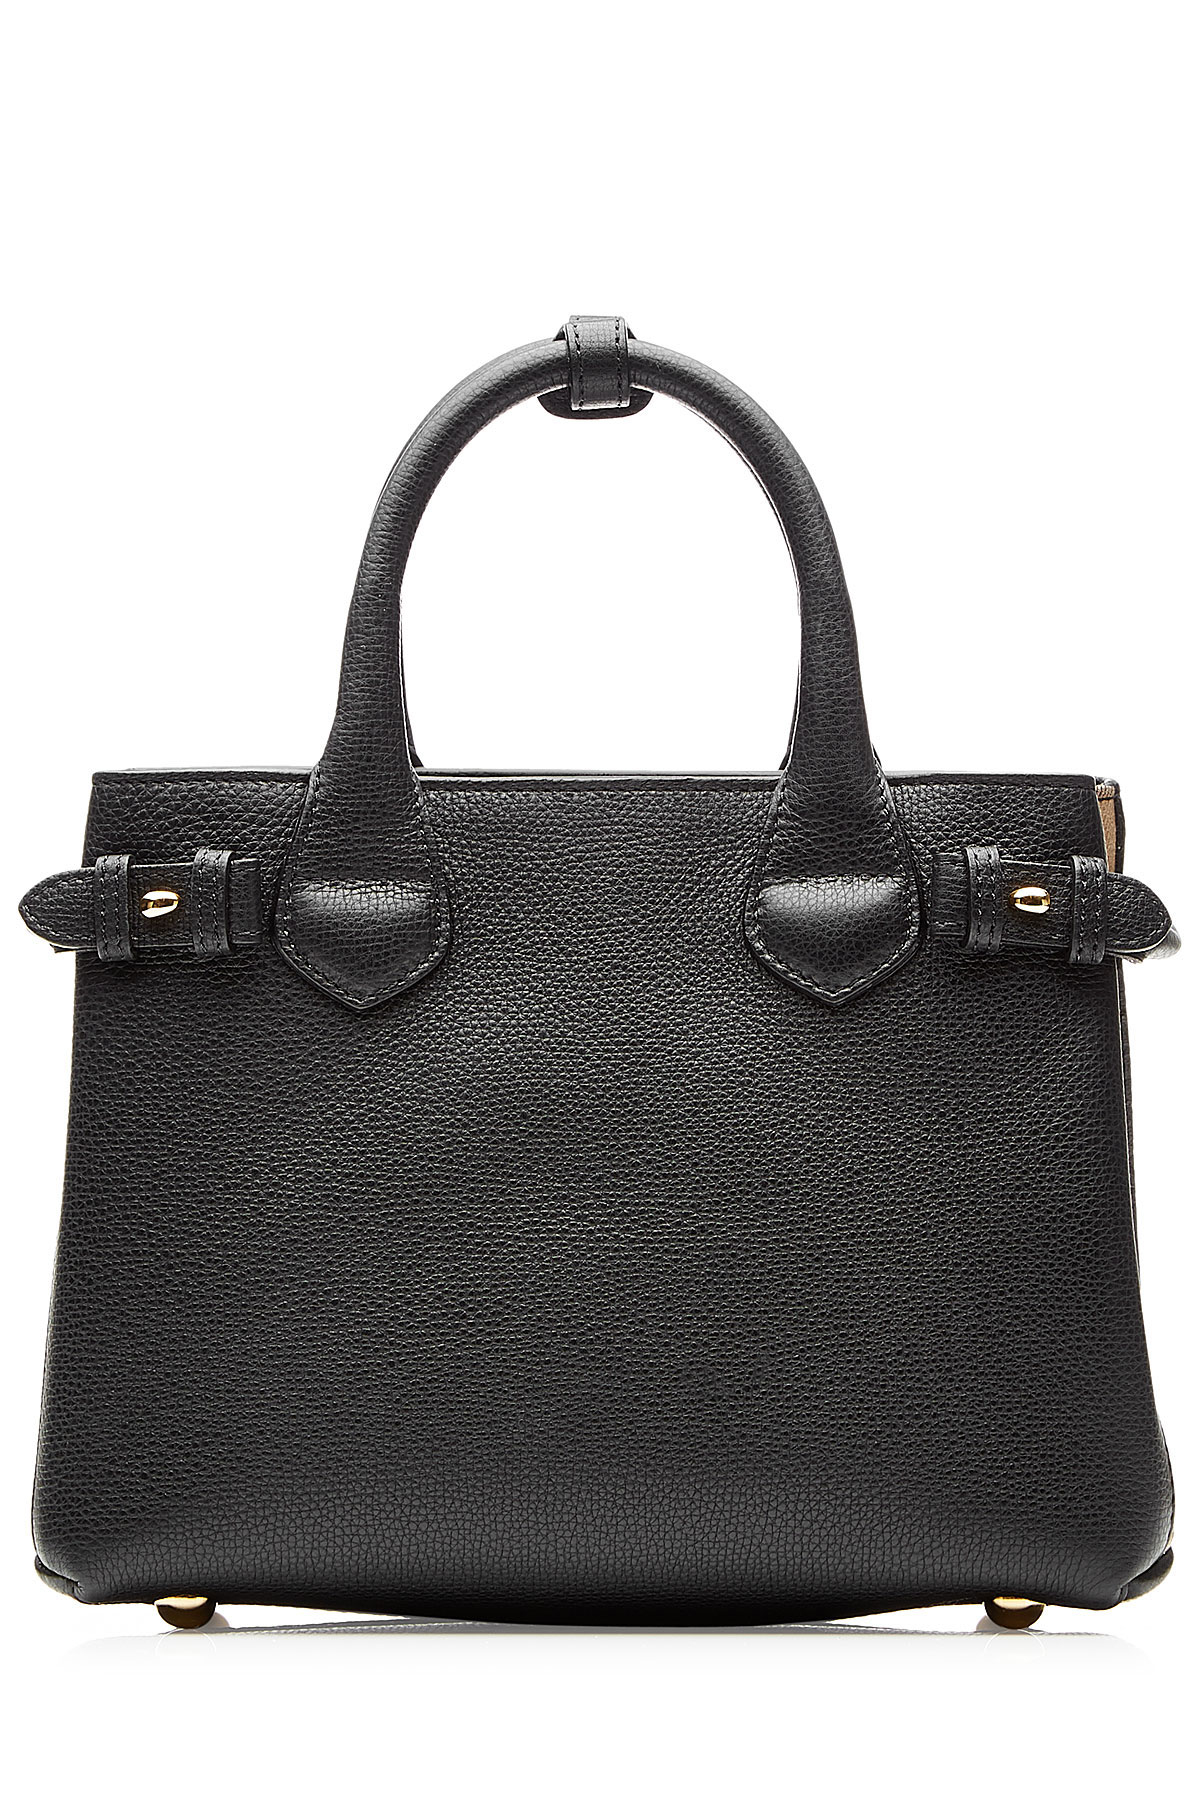 Burberry Small Banner Leather Tote - Black in Black - Lyst